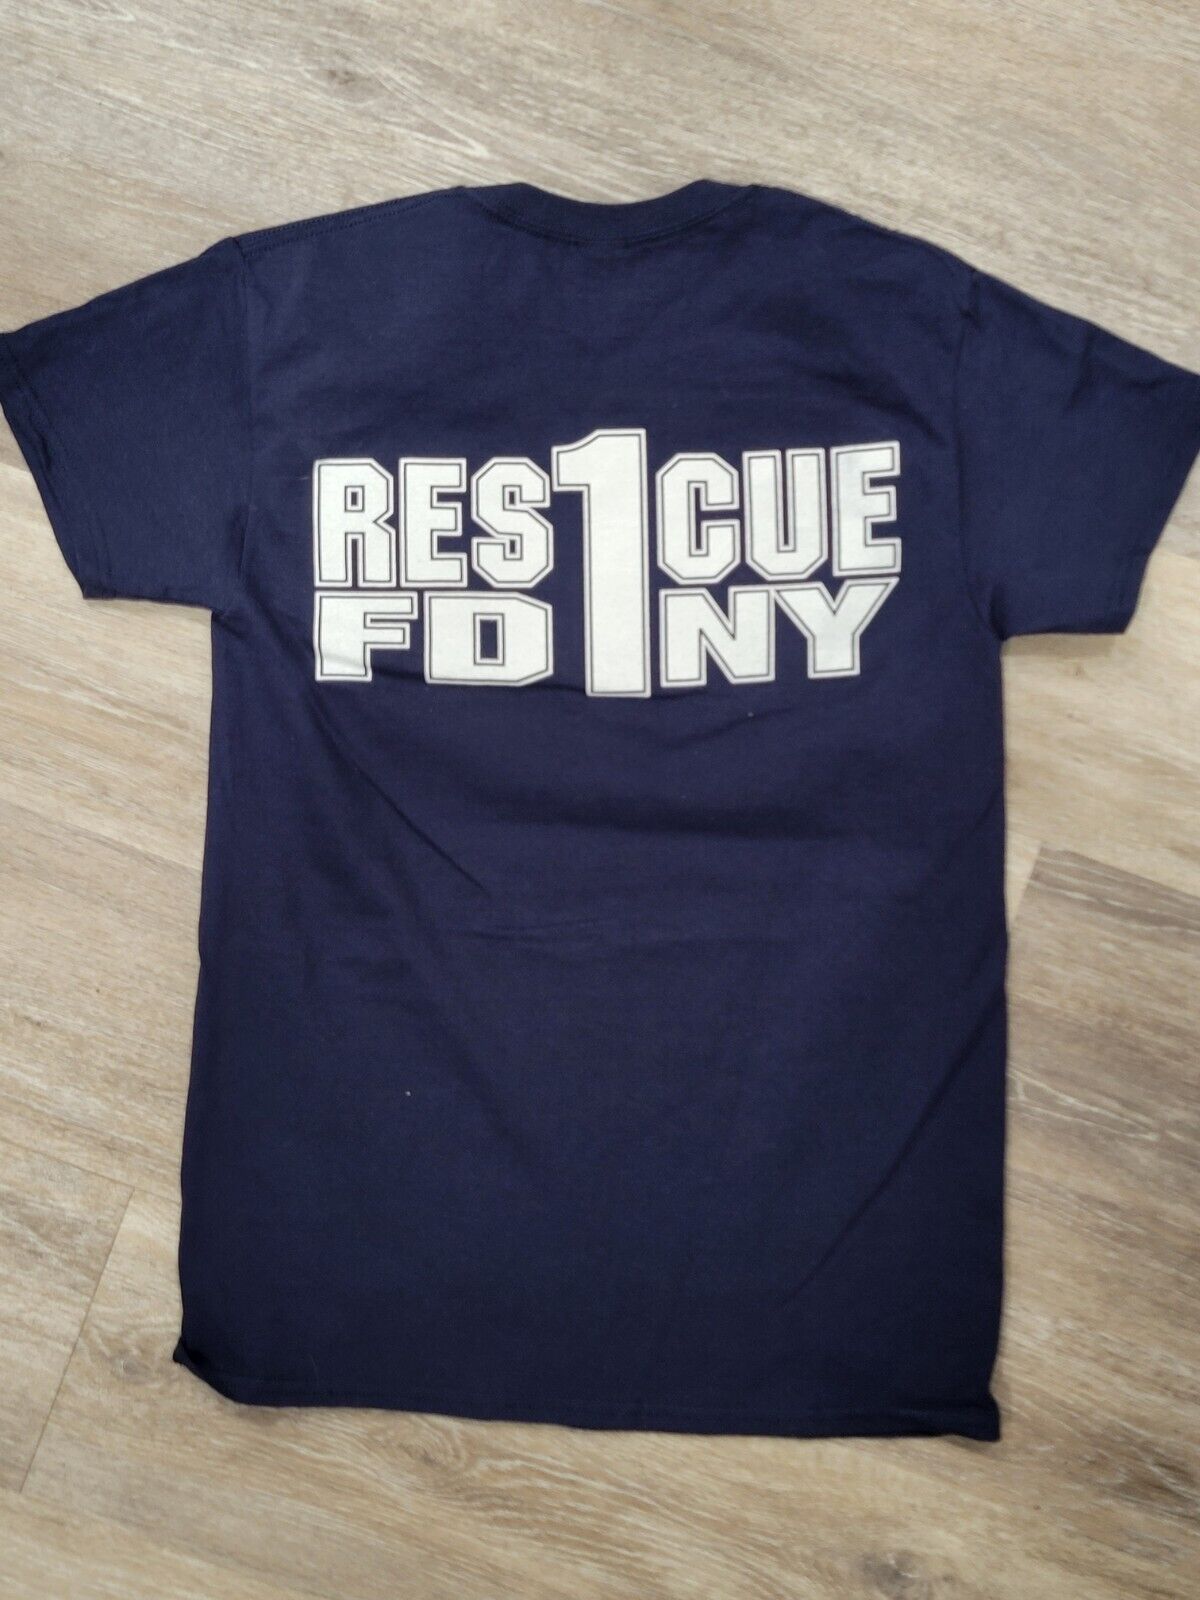 NEW Vintage FDNY Firefighter shirt NYC Rescue 1  Fire department